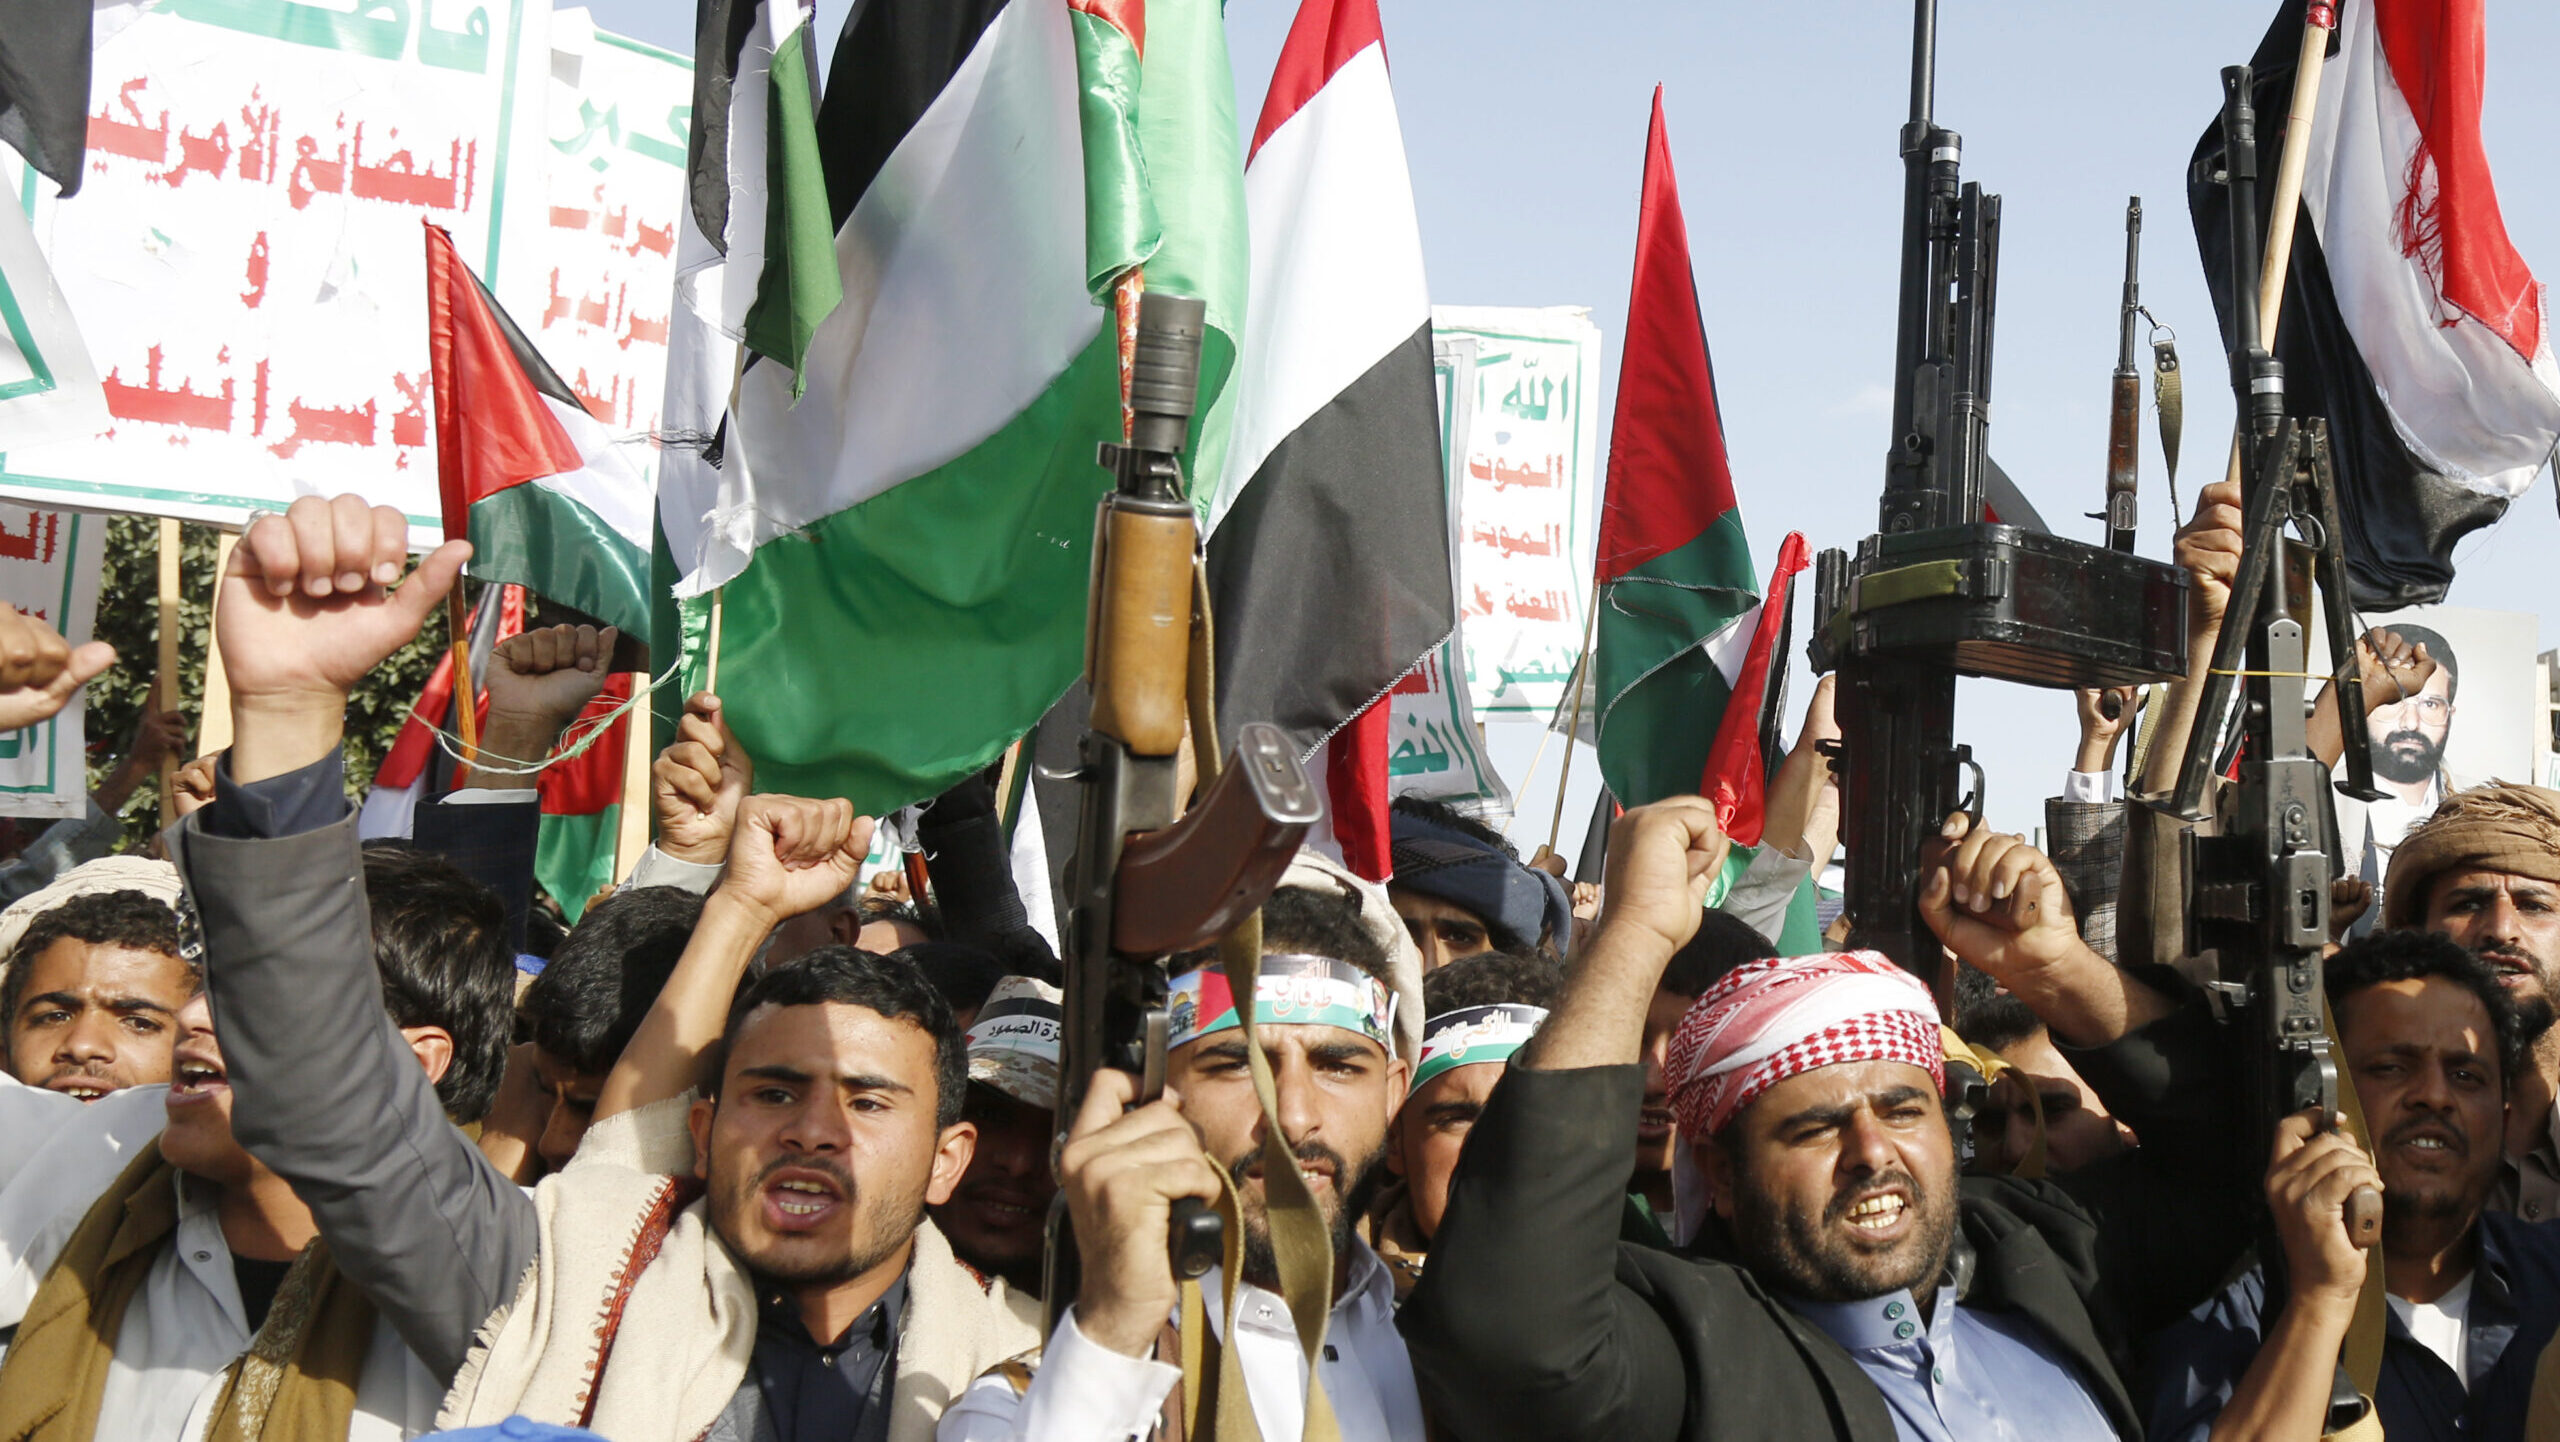 Houthis Attack Israel in a Bid to Garner Internal Support 